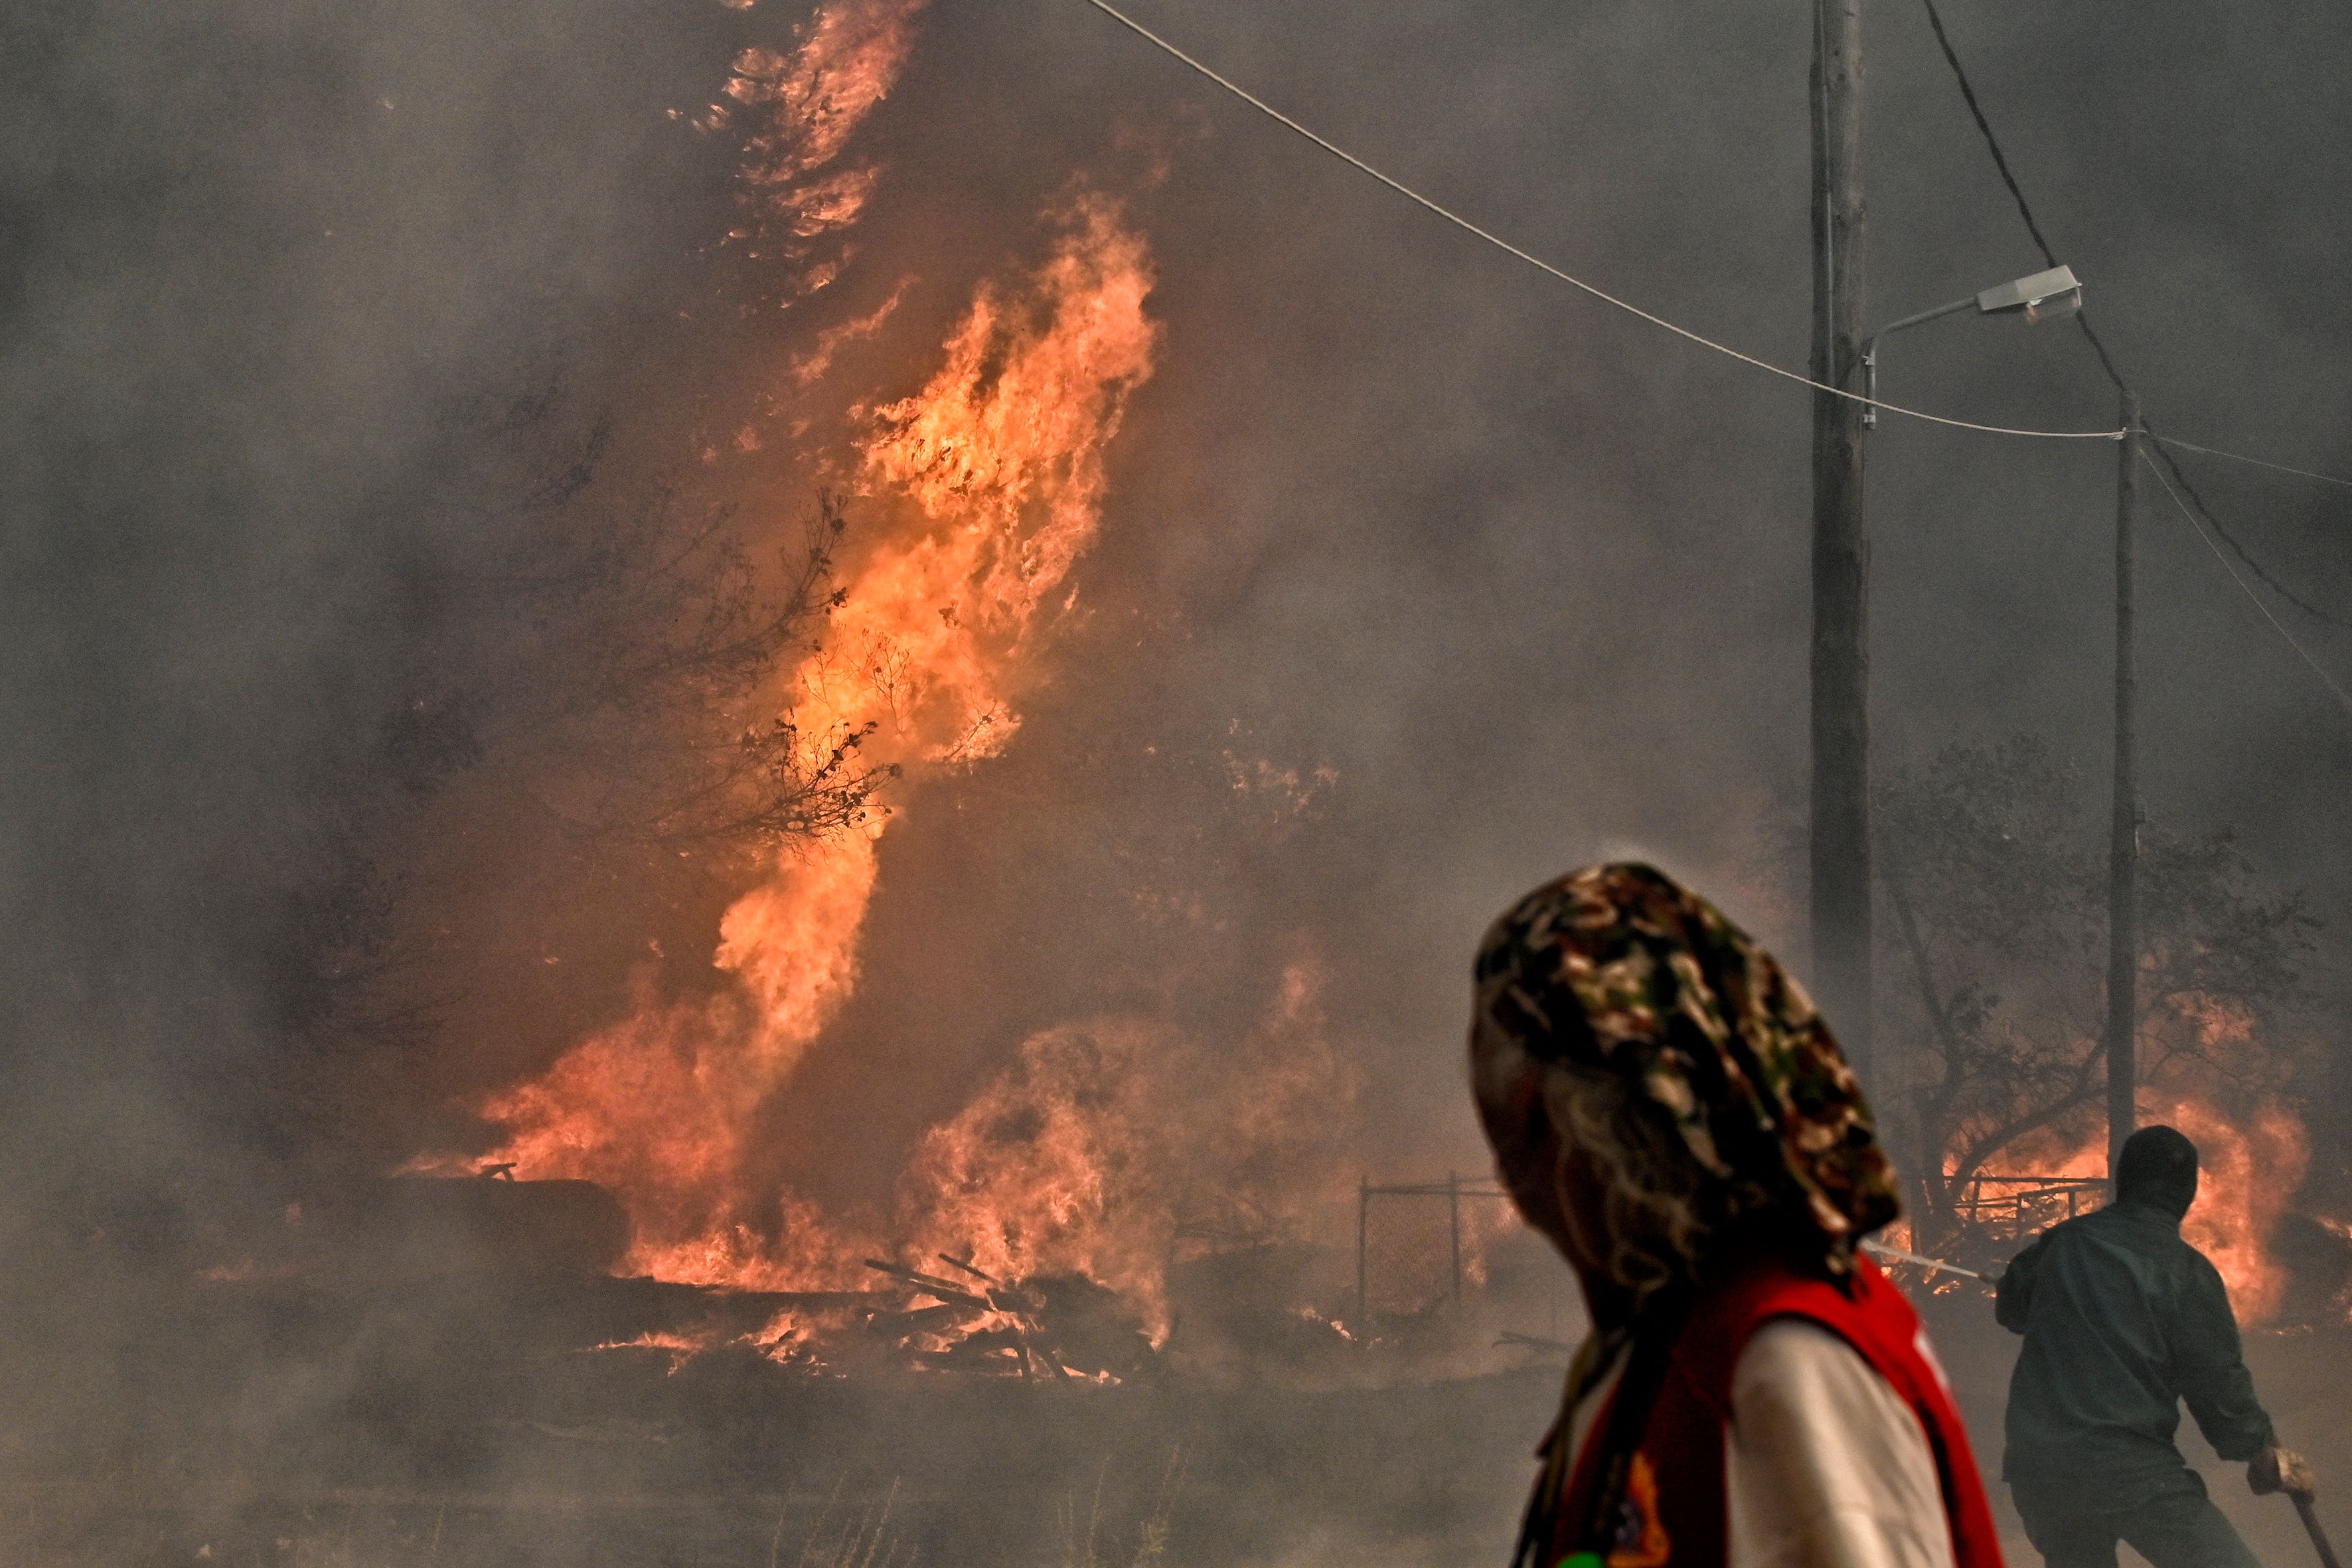 A wildfire near the resort town of Loutraki, east of Athens on July 17. The heat wave forced the temporary closure of the Acropolis monument in Greece's capital last week. 